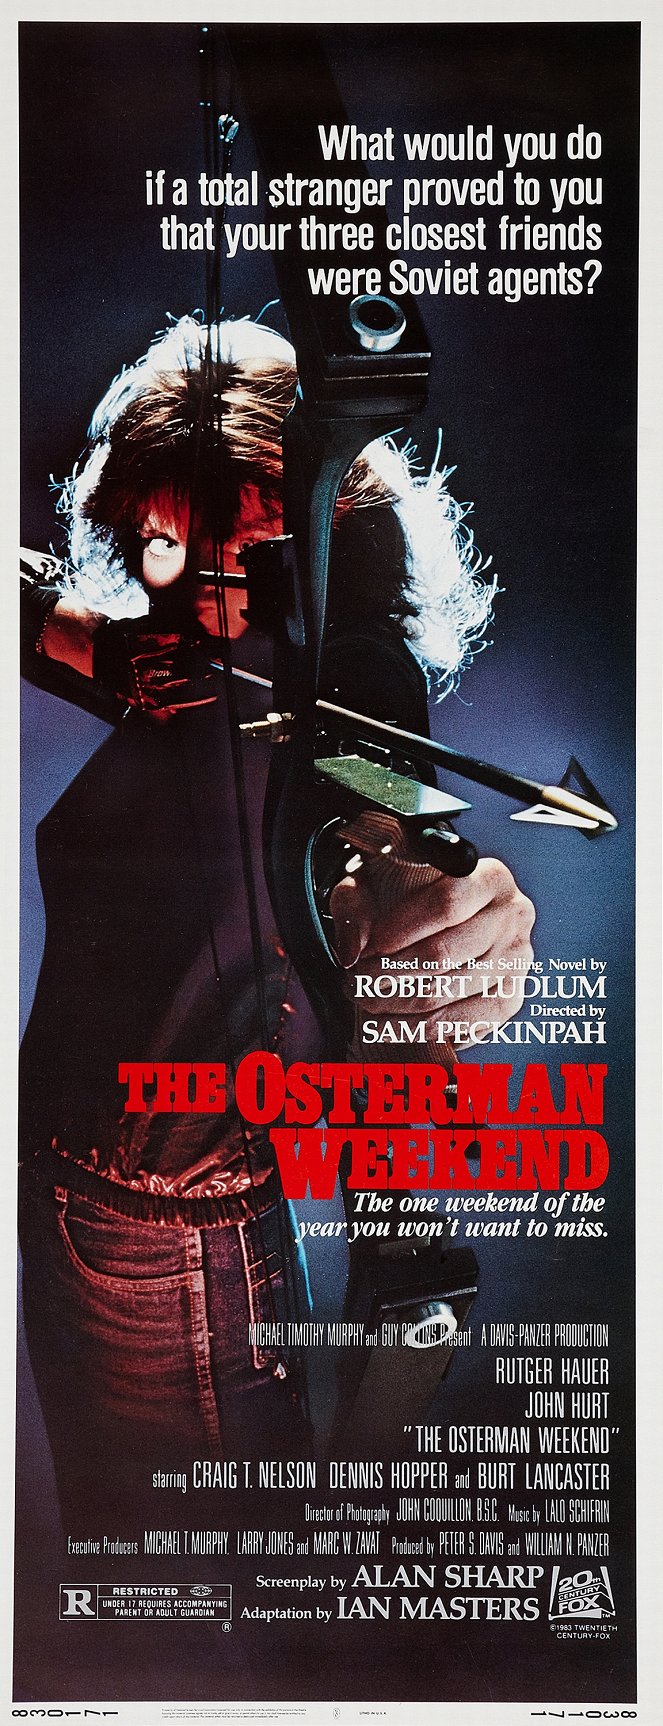 The Osterman Weekend - Posters